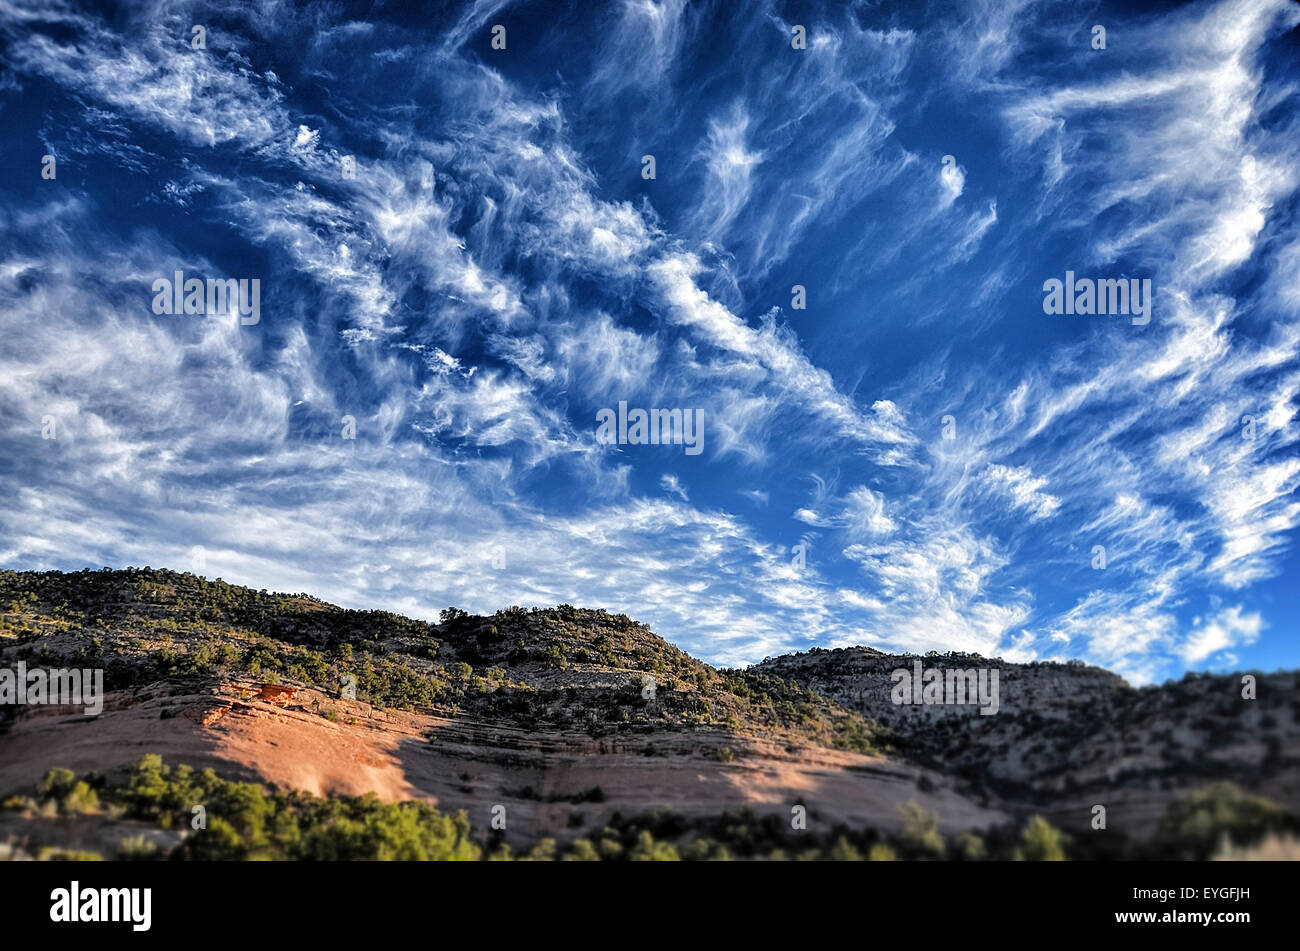 Colorado National Monument, Arches National Park, Ghost Rock Canyon Stock Photo